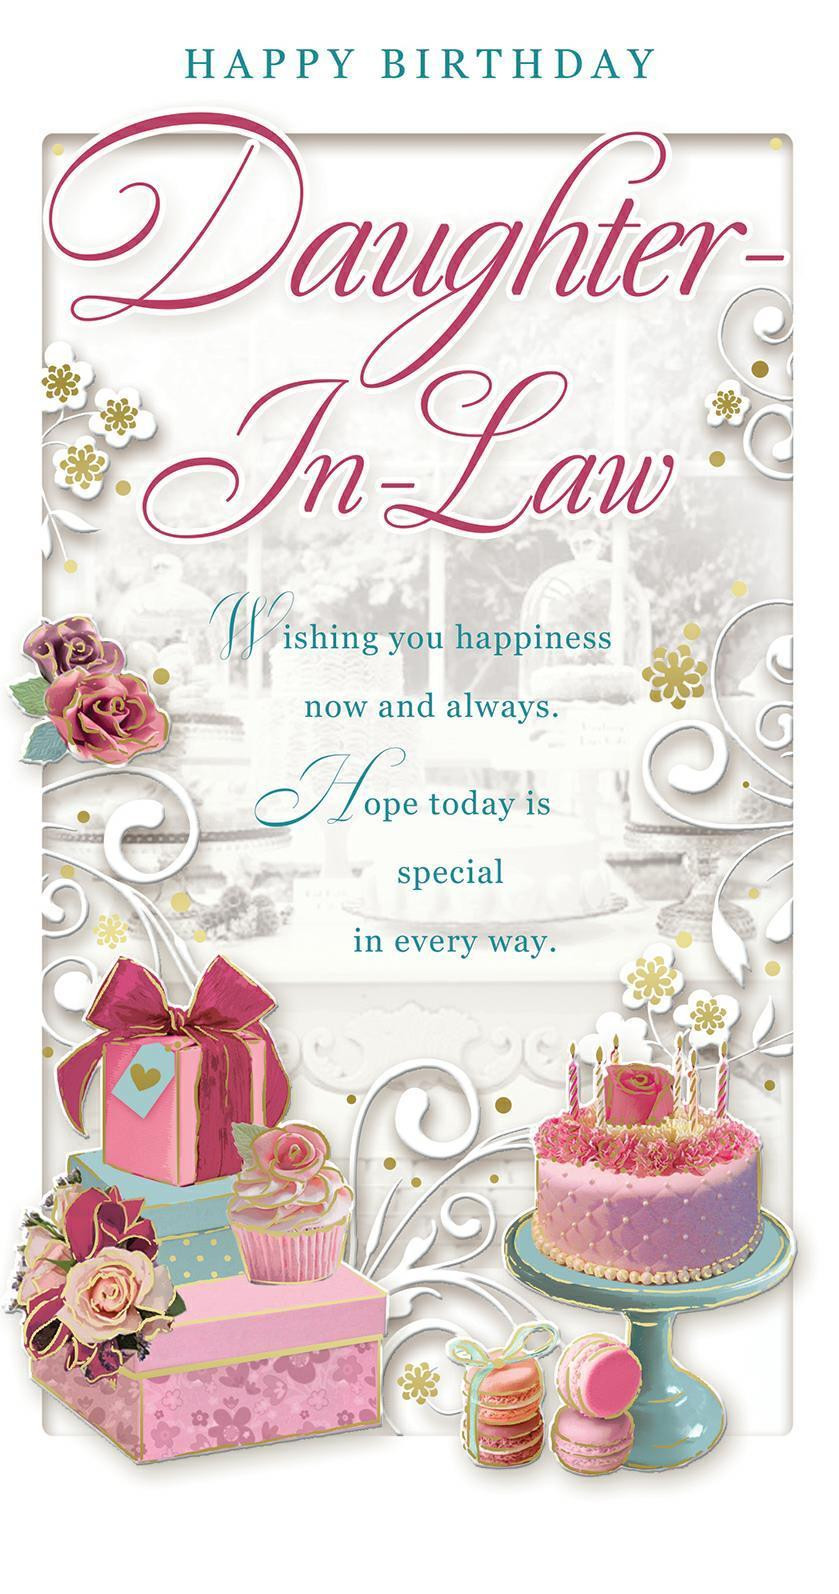 Daughter In Law Birthday Wishes
 HAPPY BIRTHDAY DAUGHTER IN LAW CARD CUPCAKE ROSES GIFTS